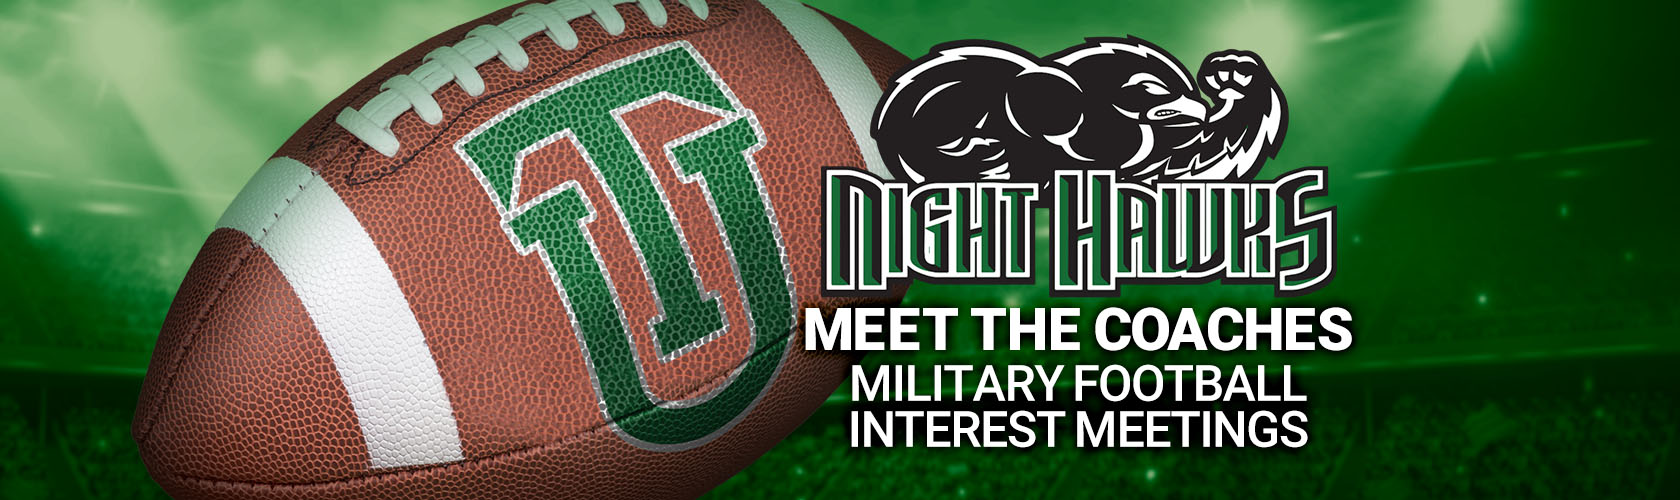 military football meeting with coaches